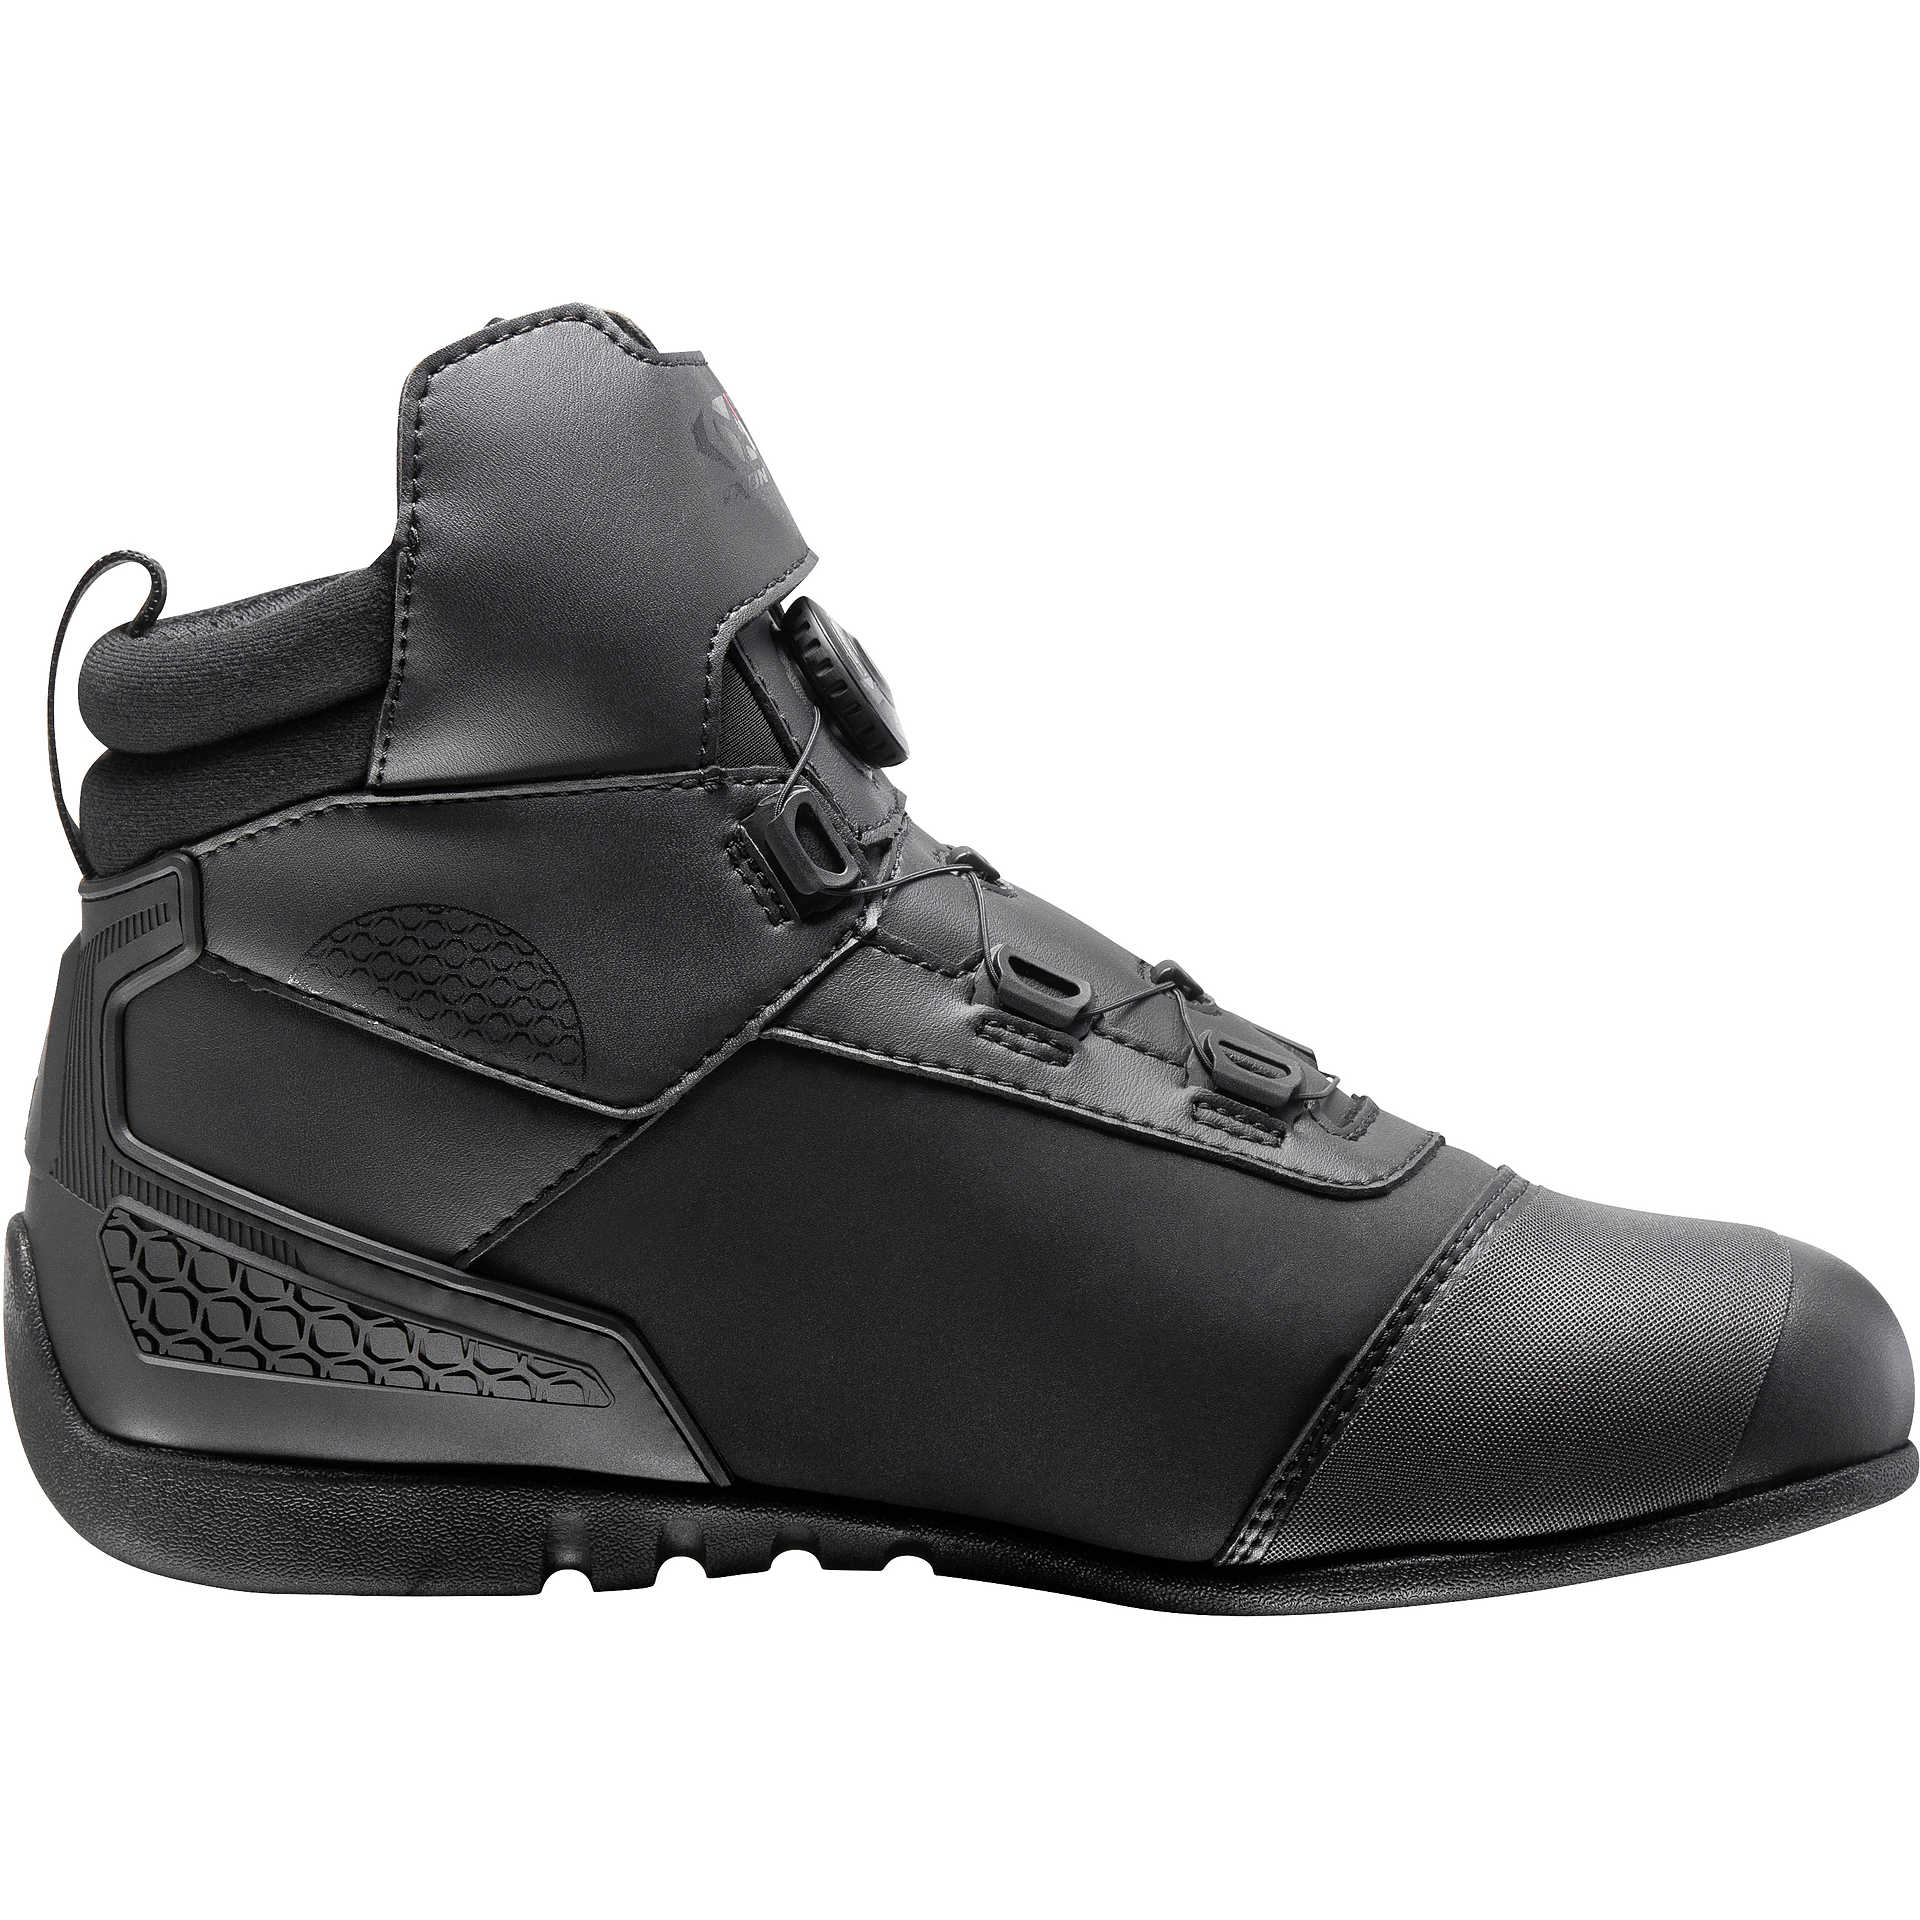 Dainese Chaussures Moto Homme Metractive Air Charcoal Homologué